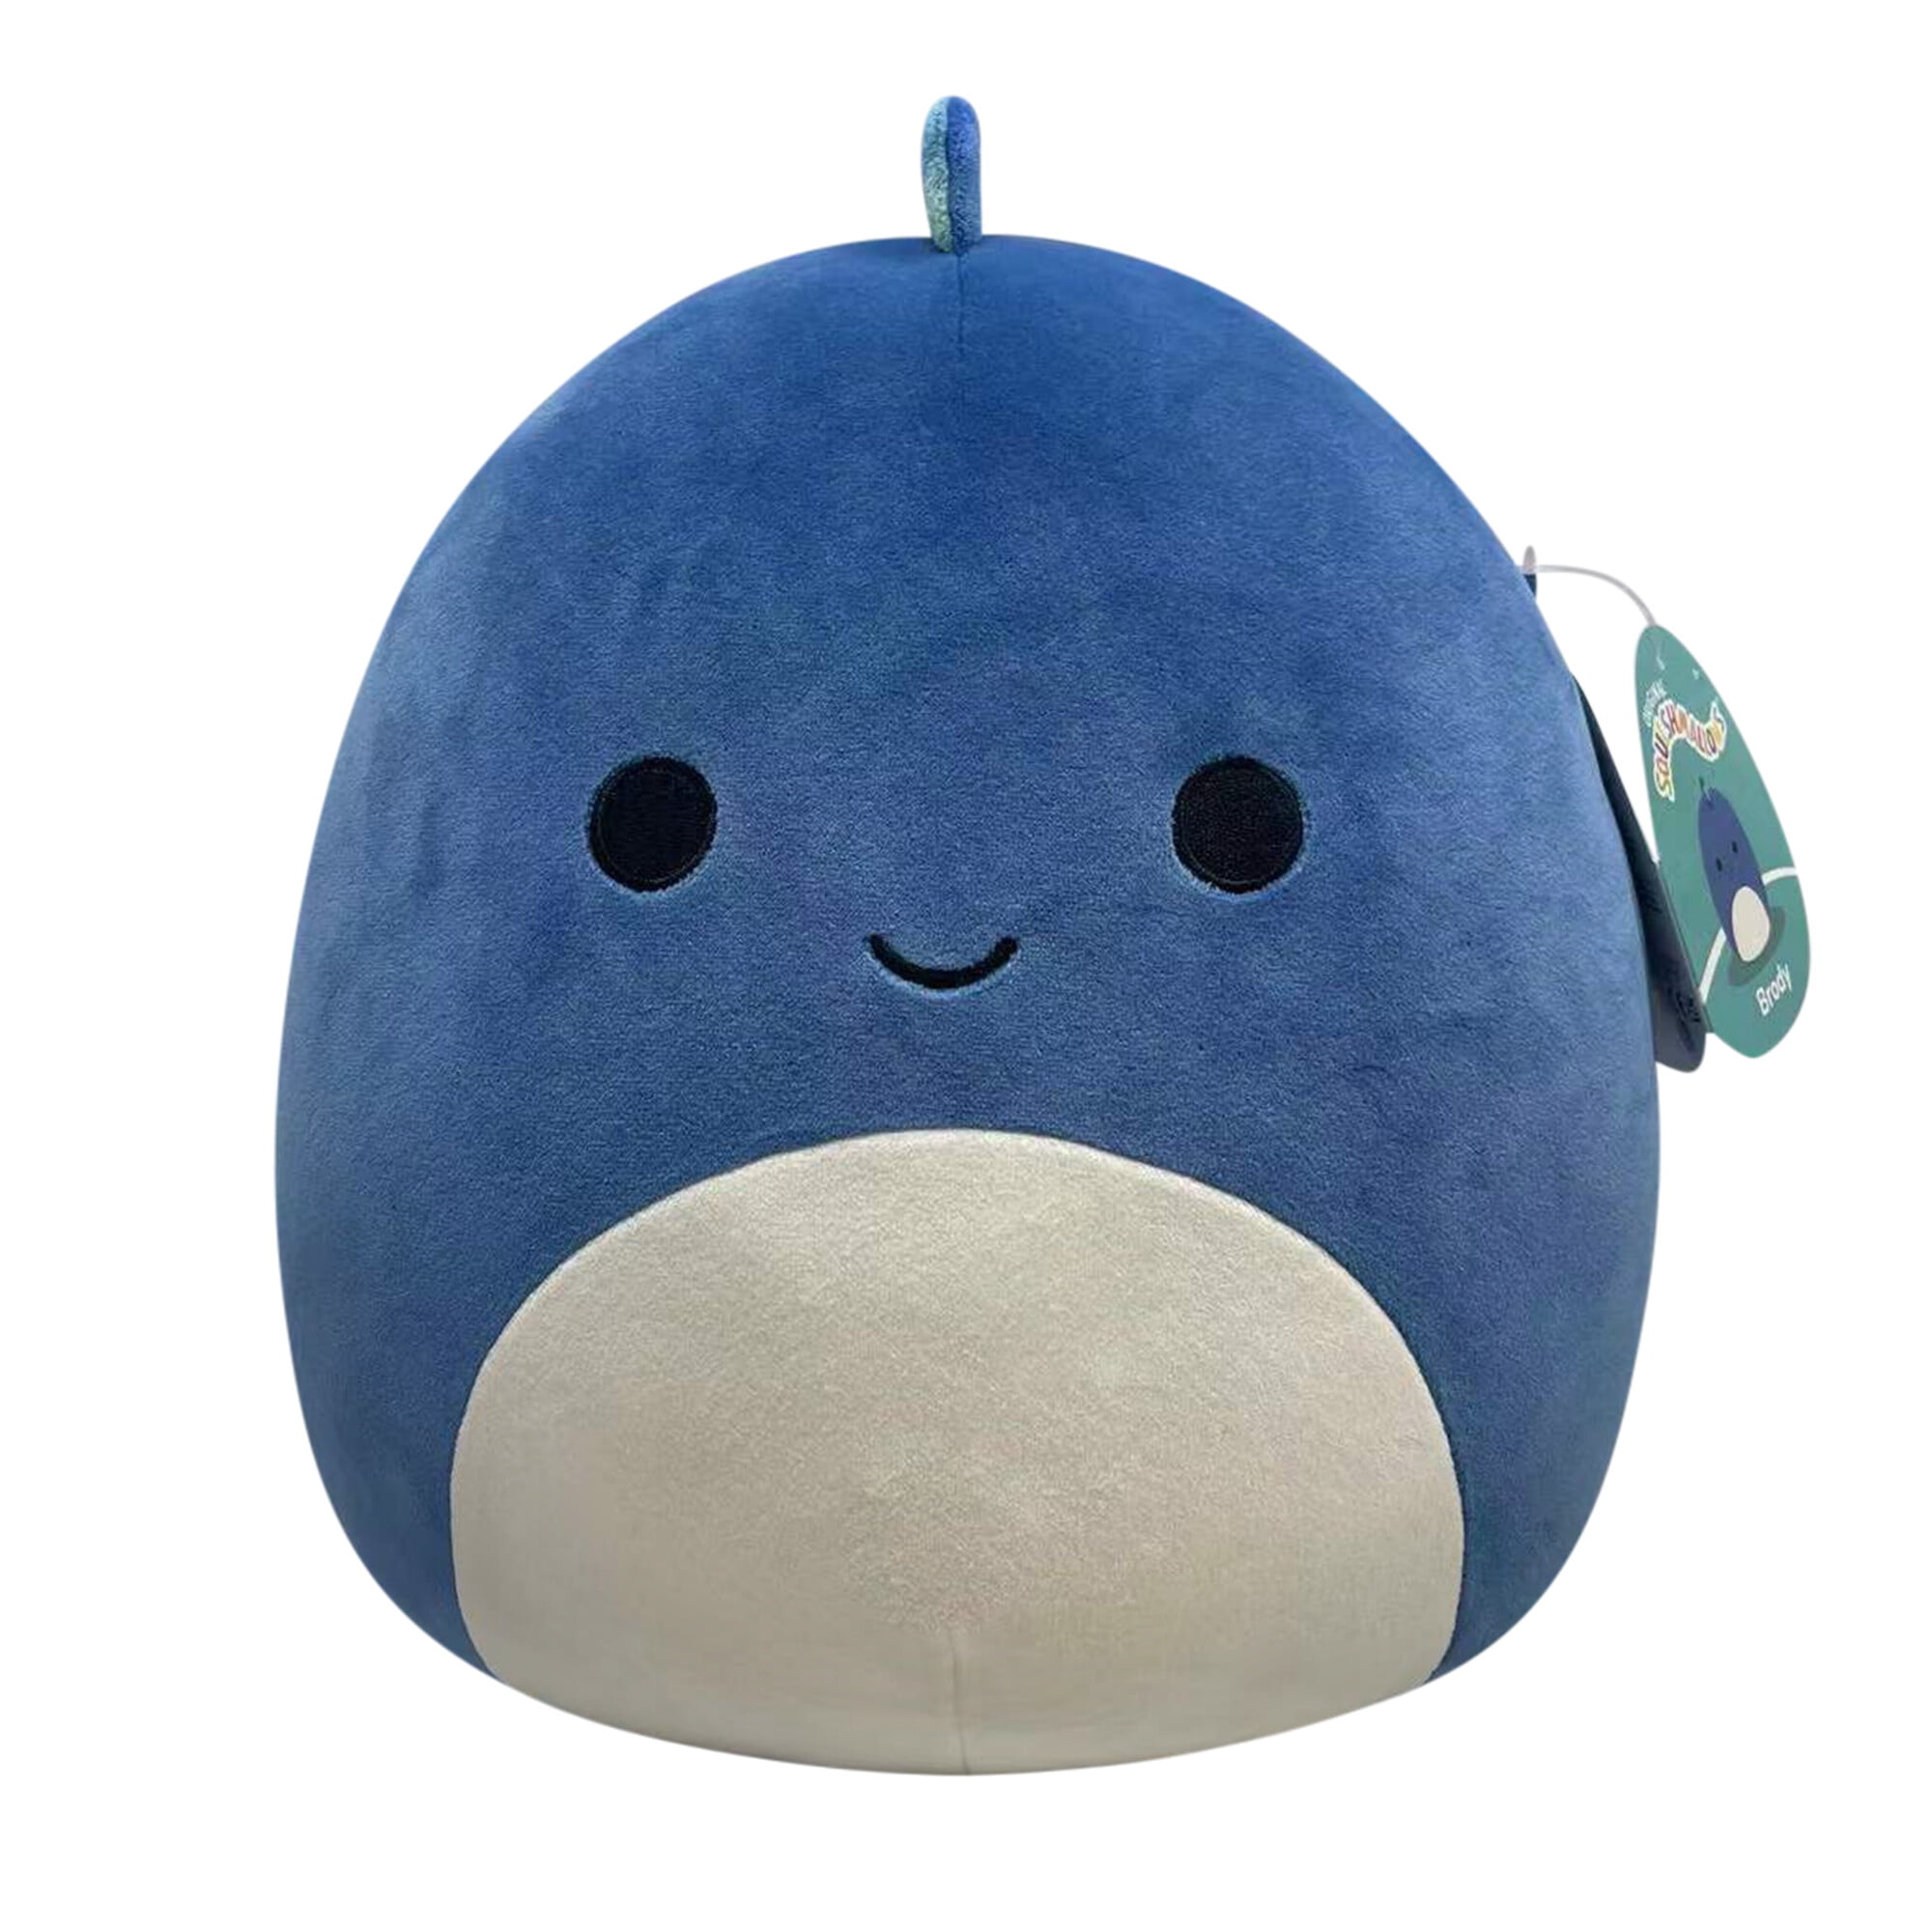 Squishmallows Official Plush 14 inch Brody the Blue Dinosaur - Child's ...